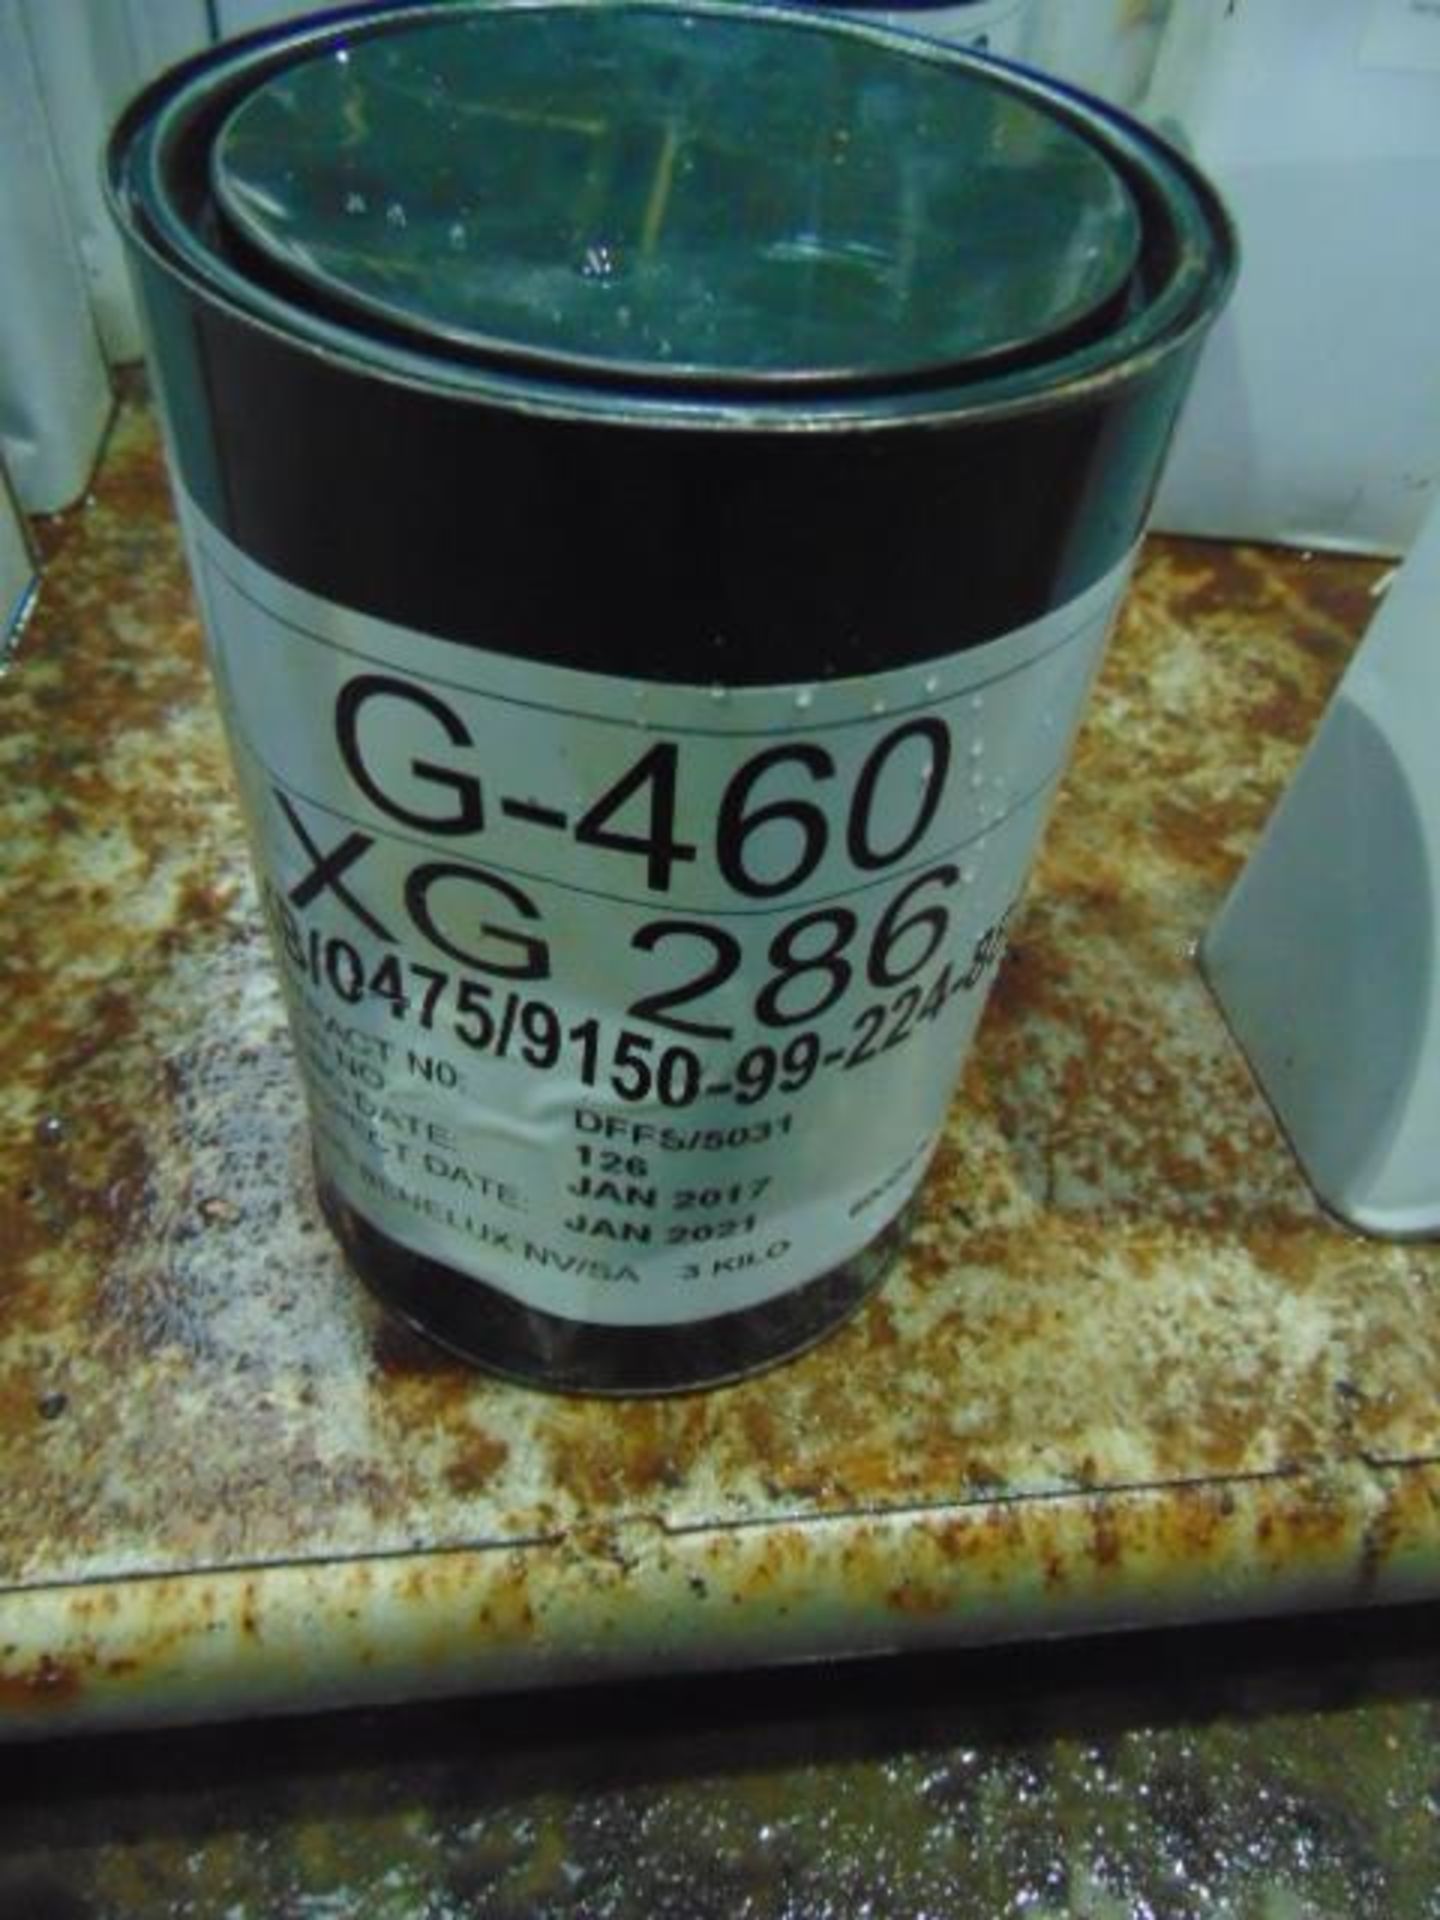 5 x 3 Kilo Cans of G-460/XG-286 Grease Direct from reserve stores